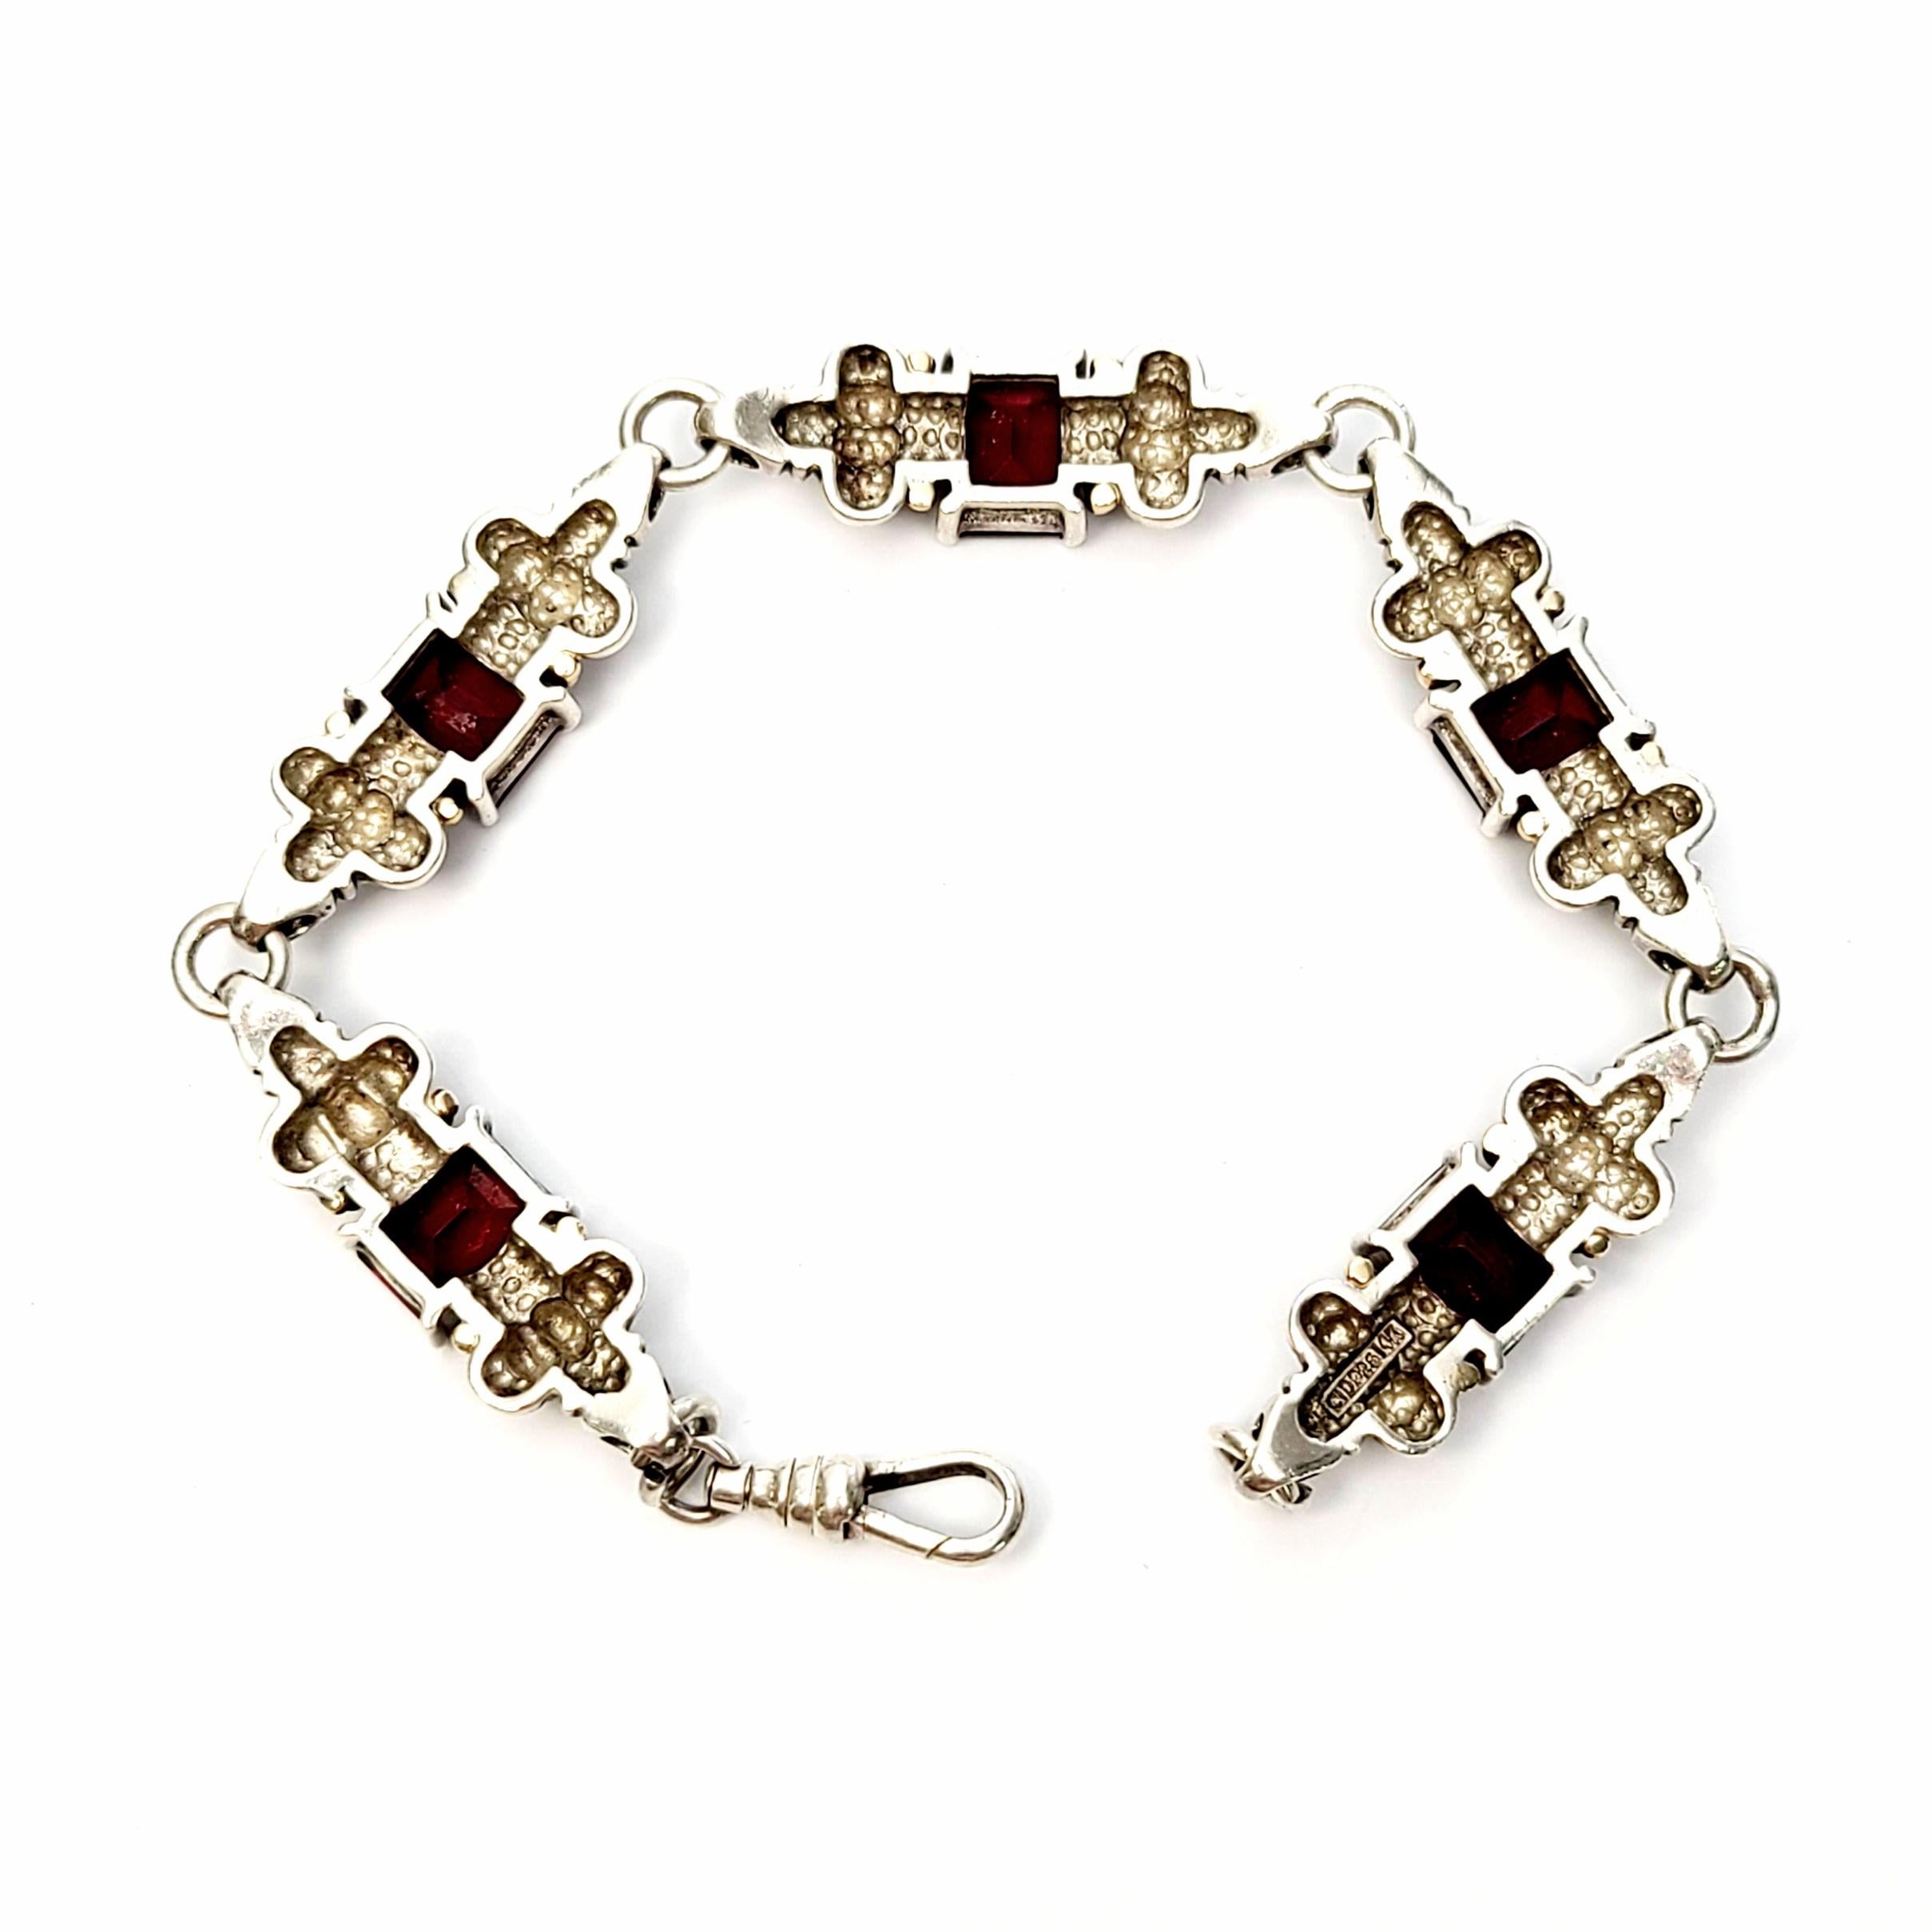 Sterling silver, 14K and garnet bracelet by designer Clyde Duneier.

Beautiful renaissance style piece featuring 5 sterling silver links with an emerald cut, deep red garnet at the center with gold bead accents on either side of each stone. Unique